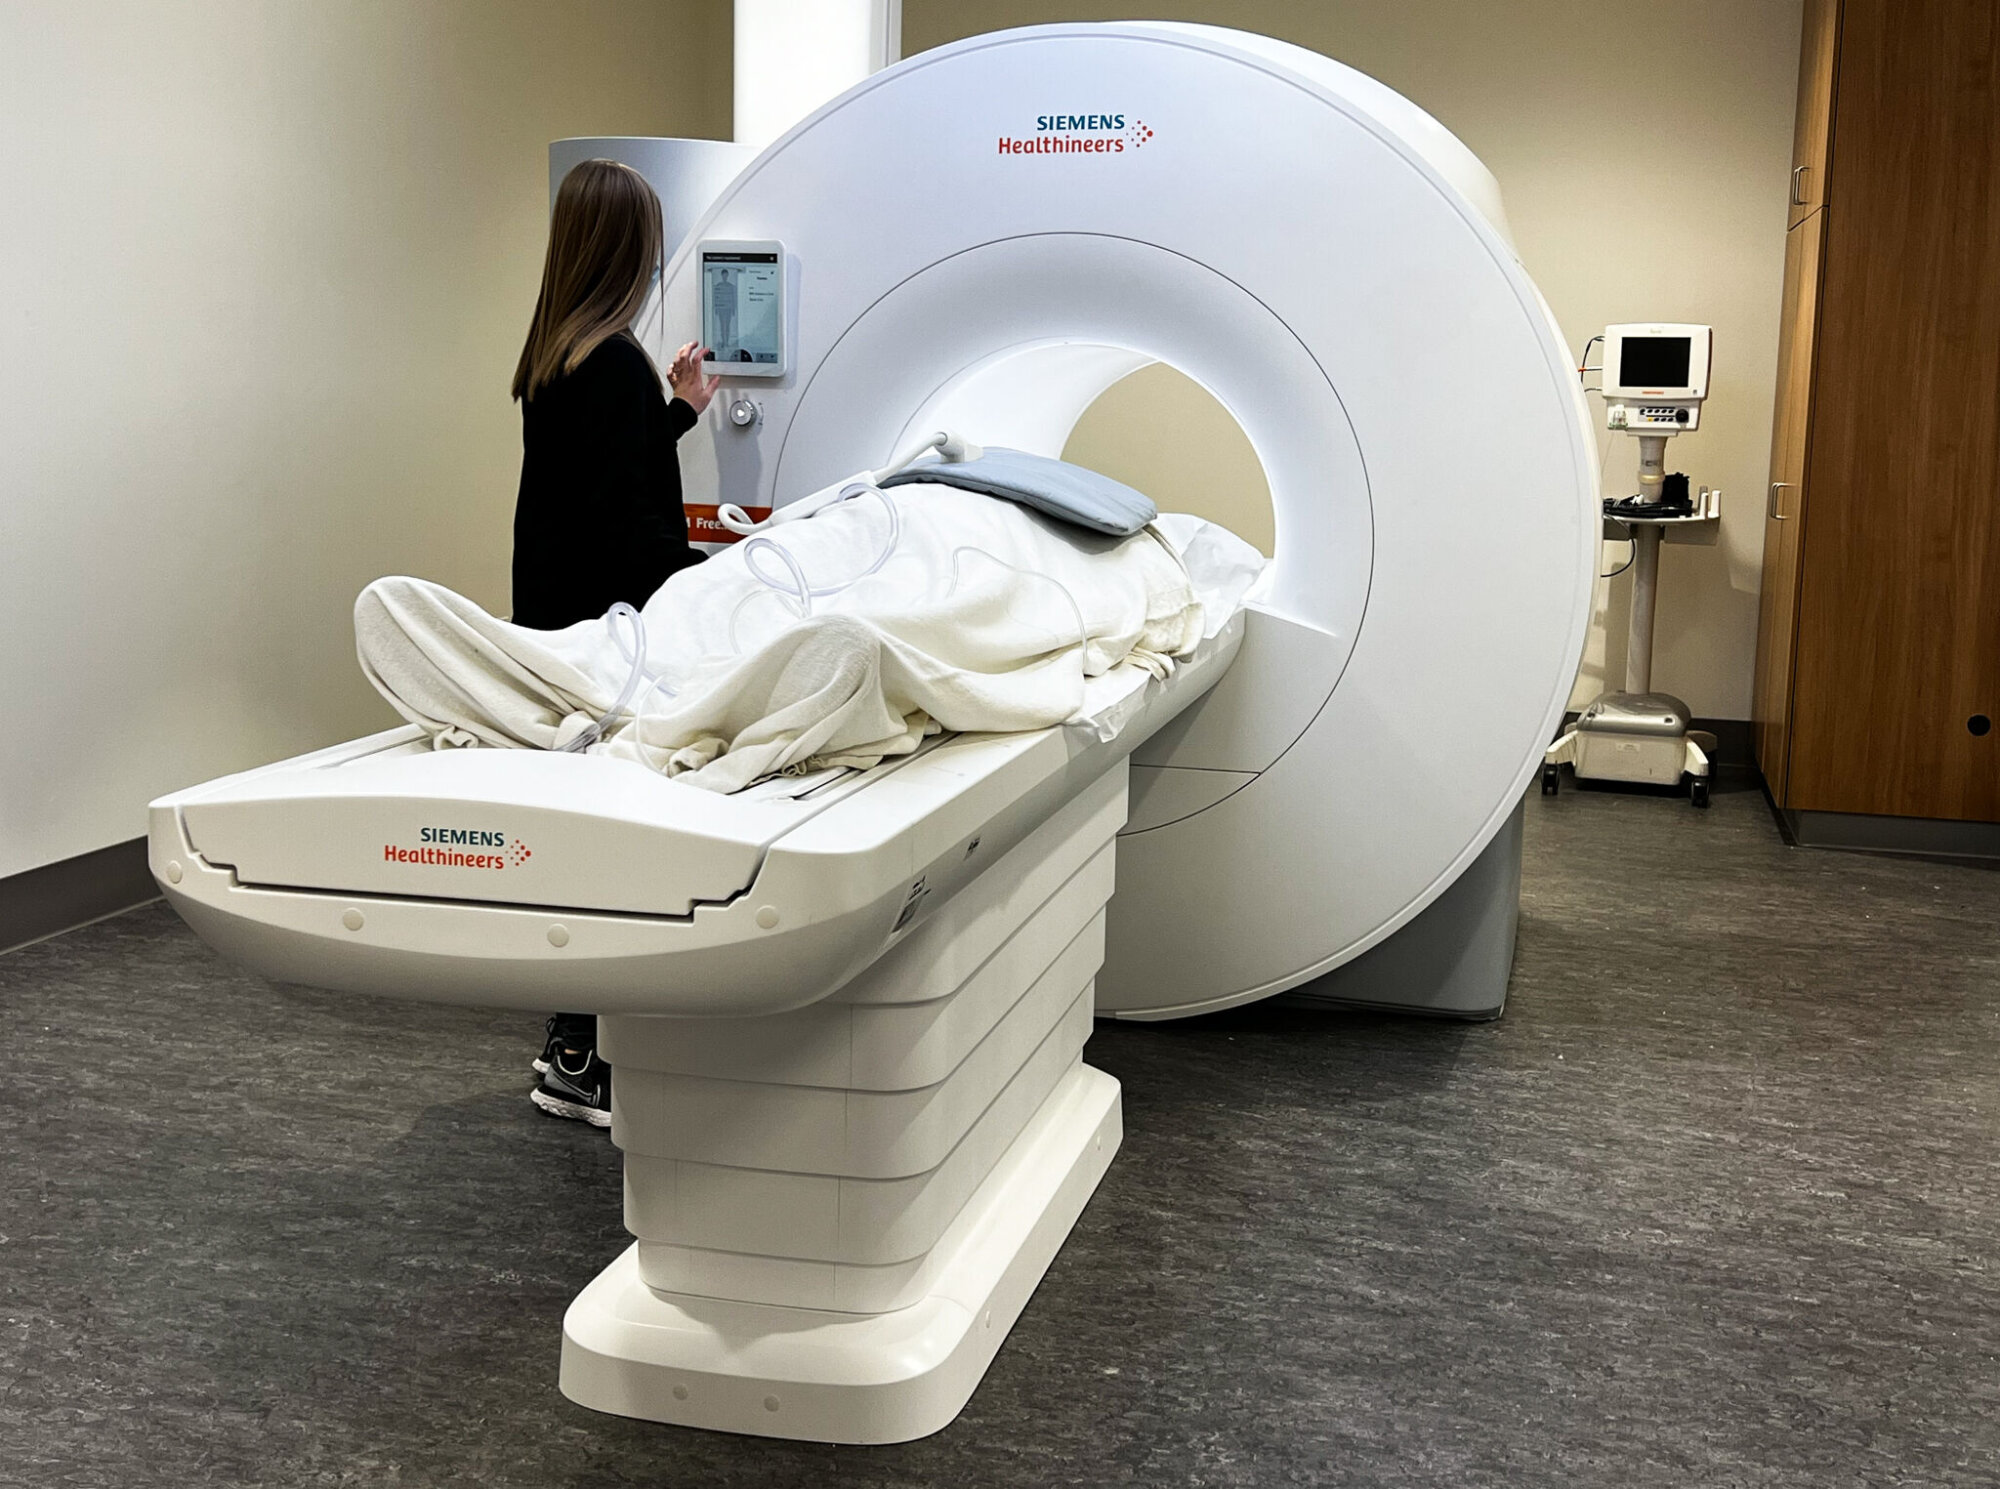 New MRI helps patients with implanted devices, claustrophobia or